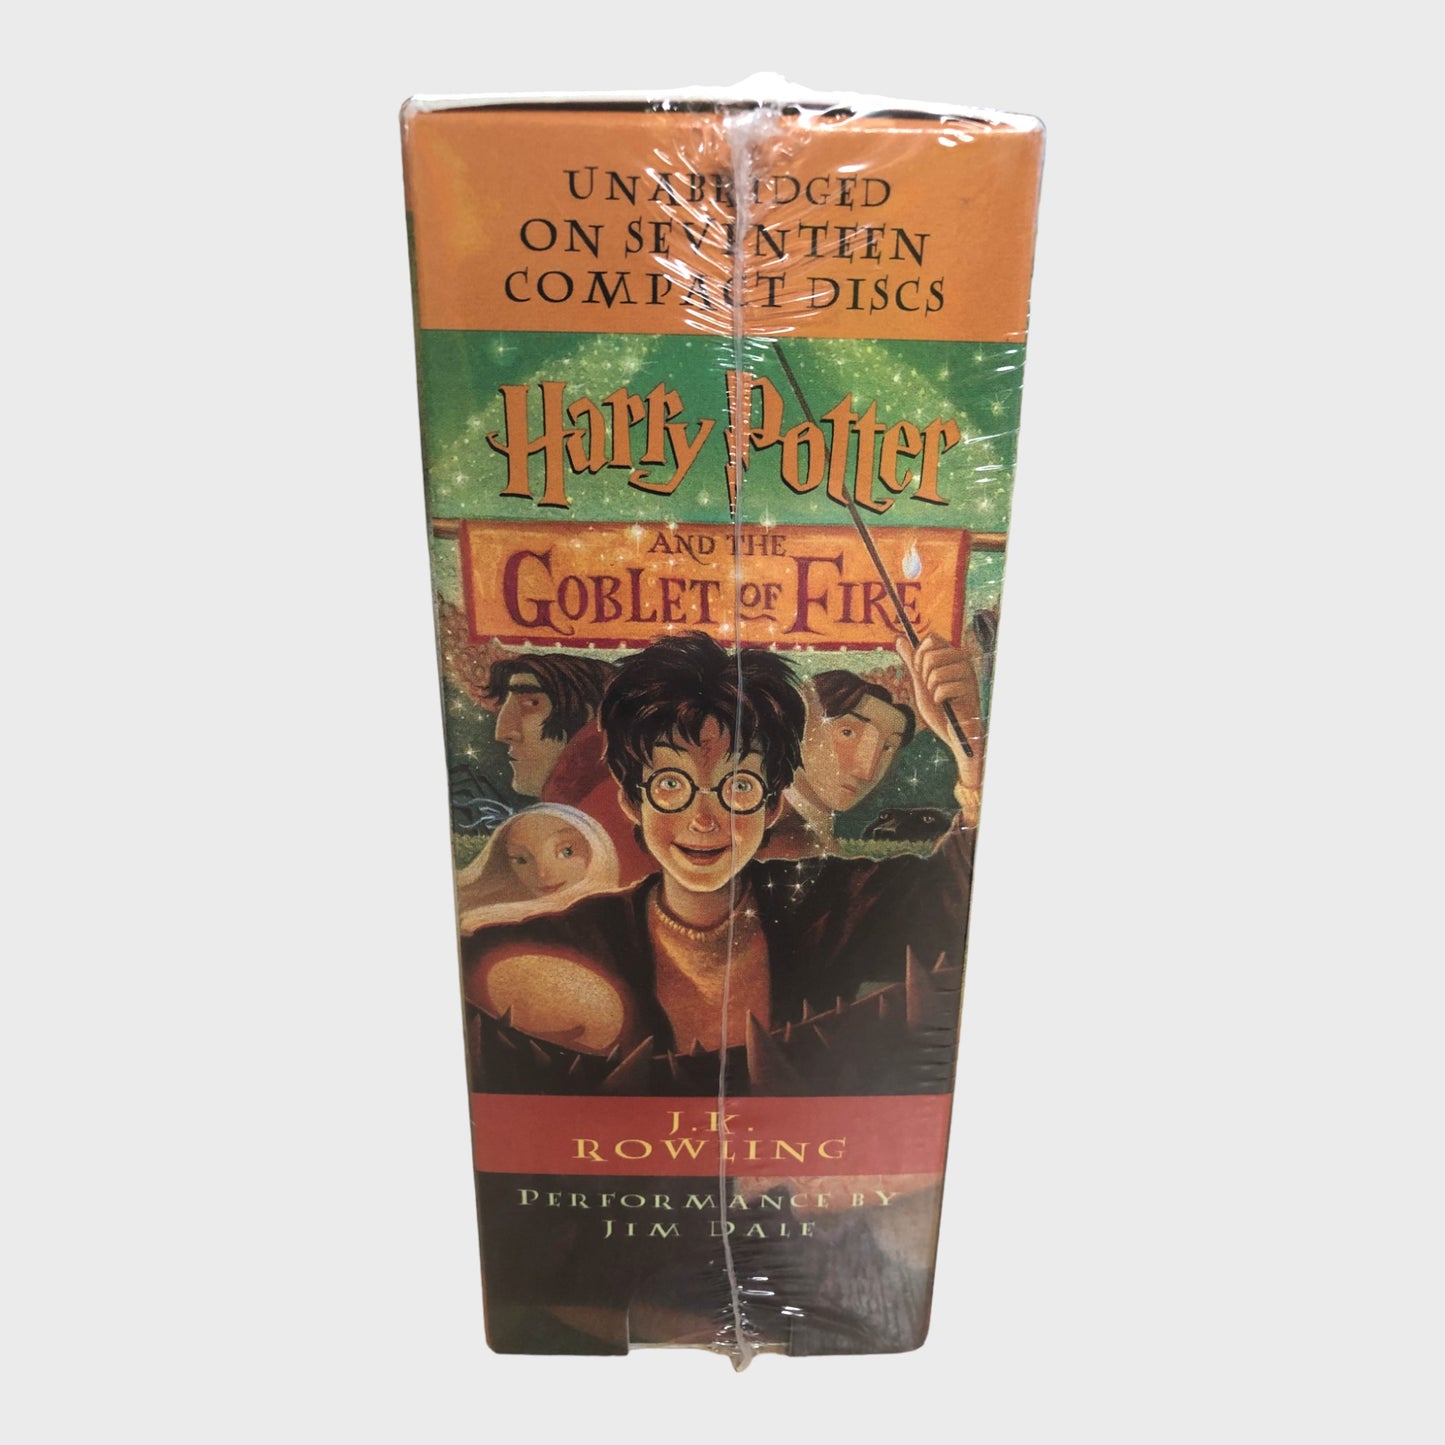 Harry Potter and the goblet of fire audio book